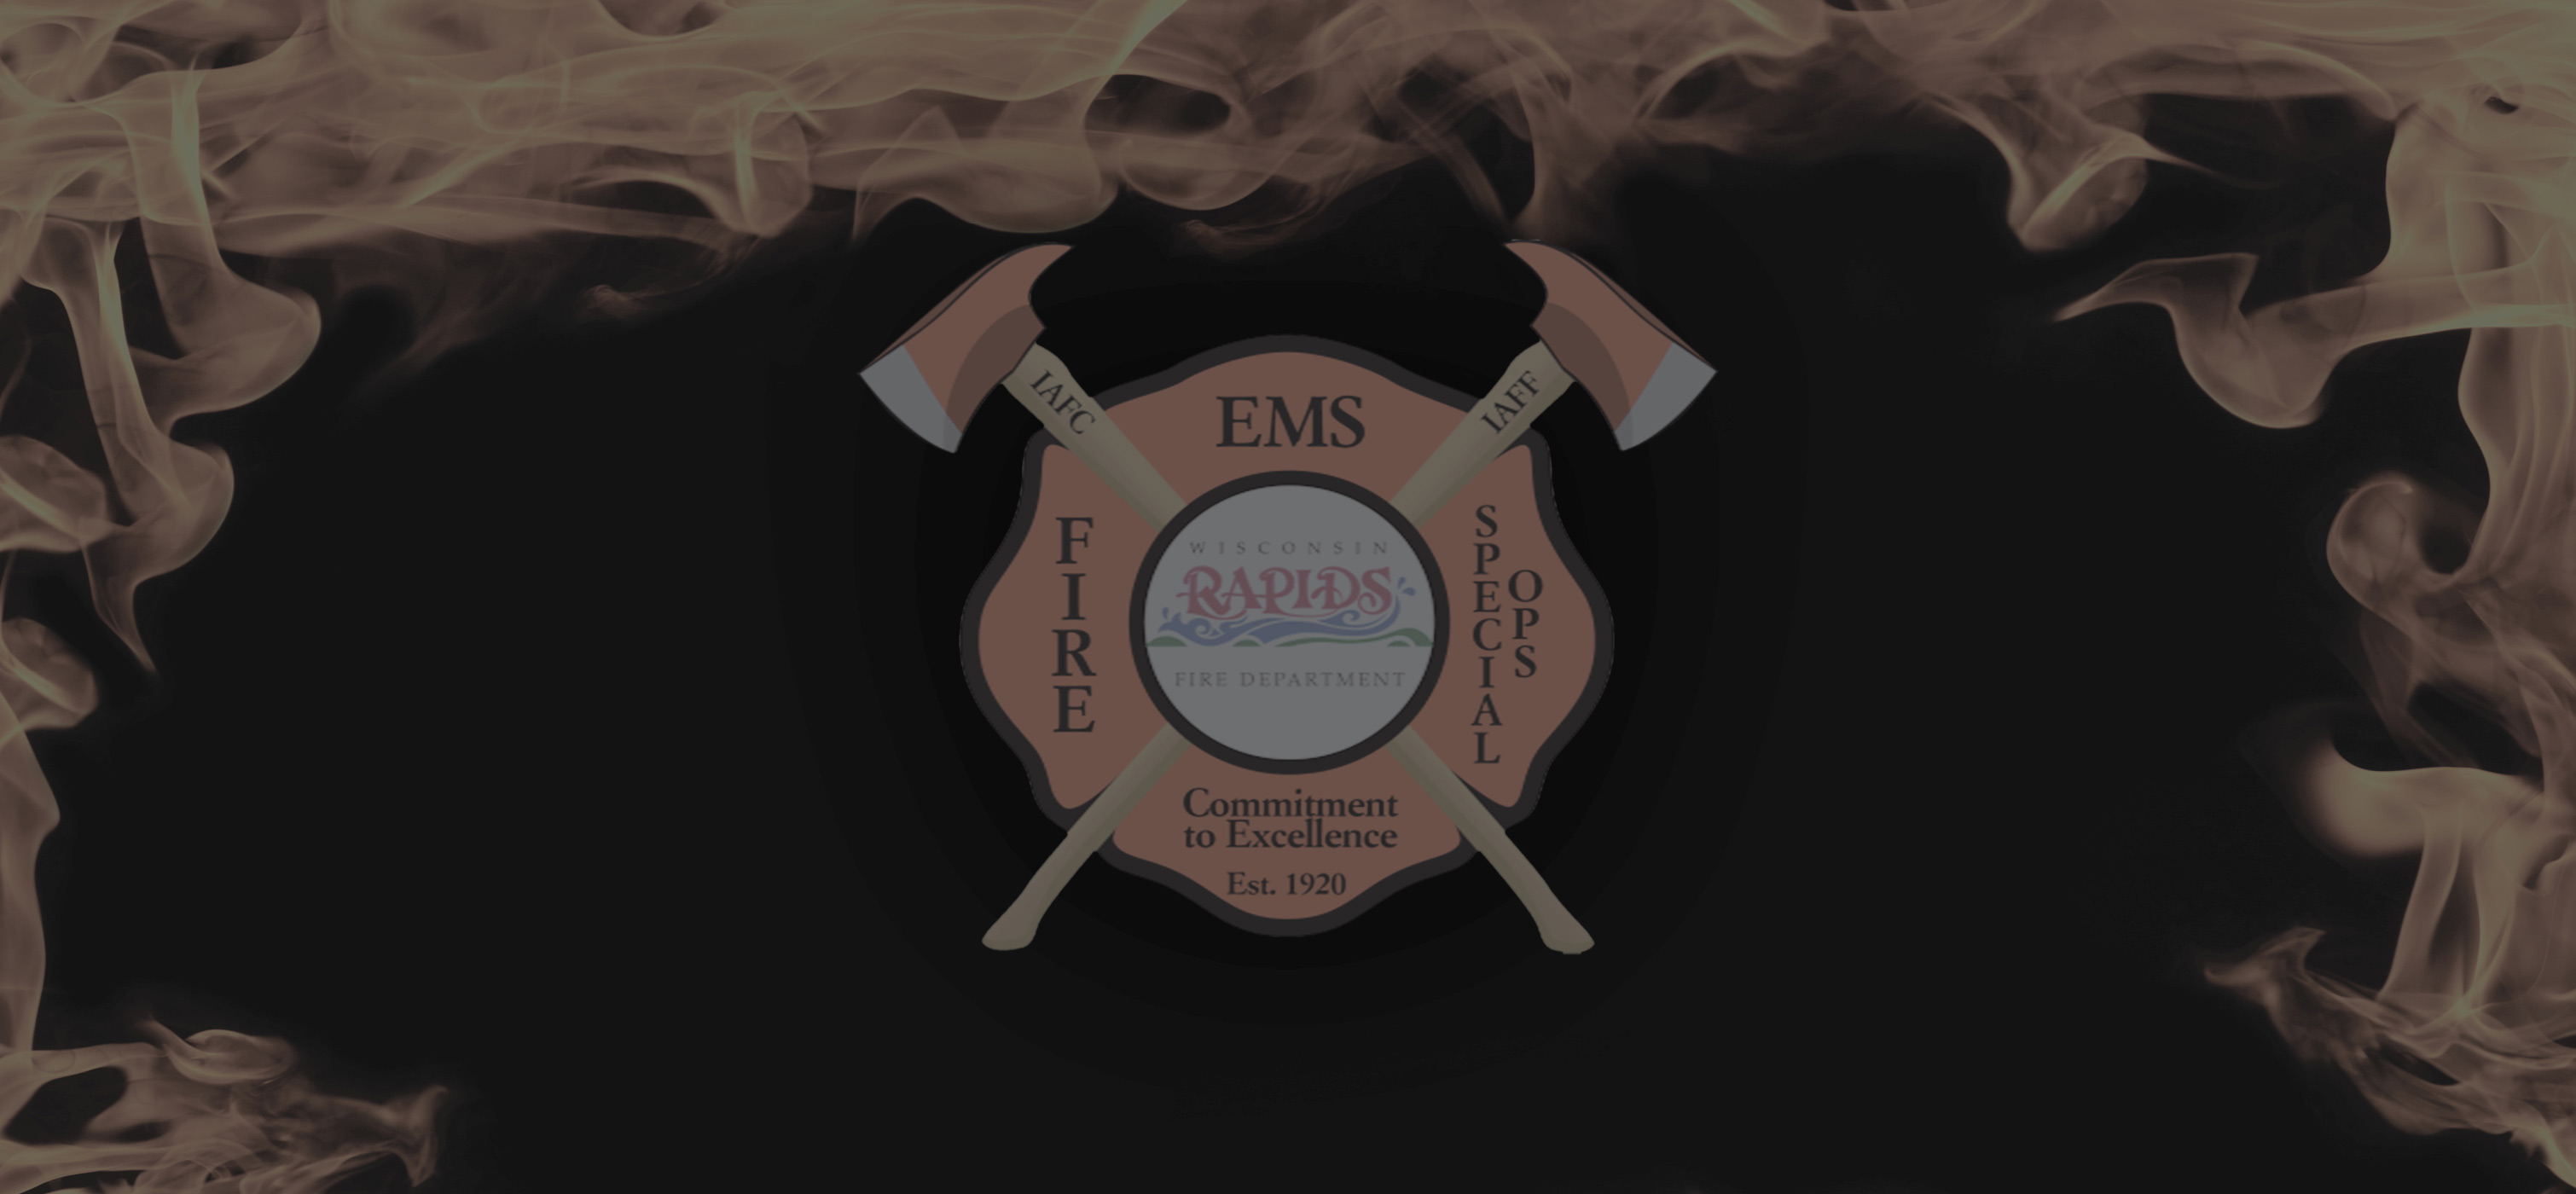 wisconsin rapids fire department logo surrounded by flames